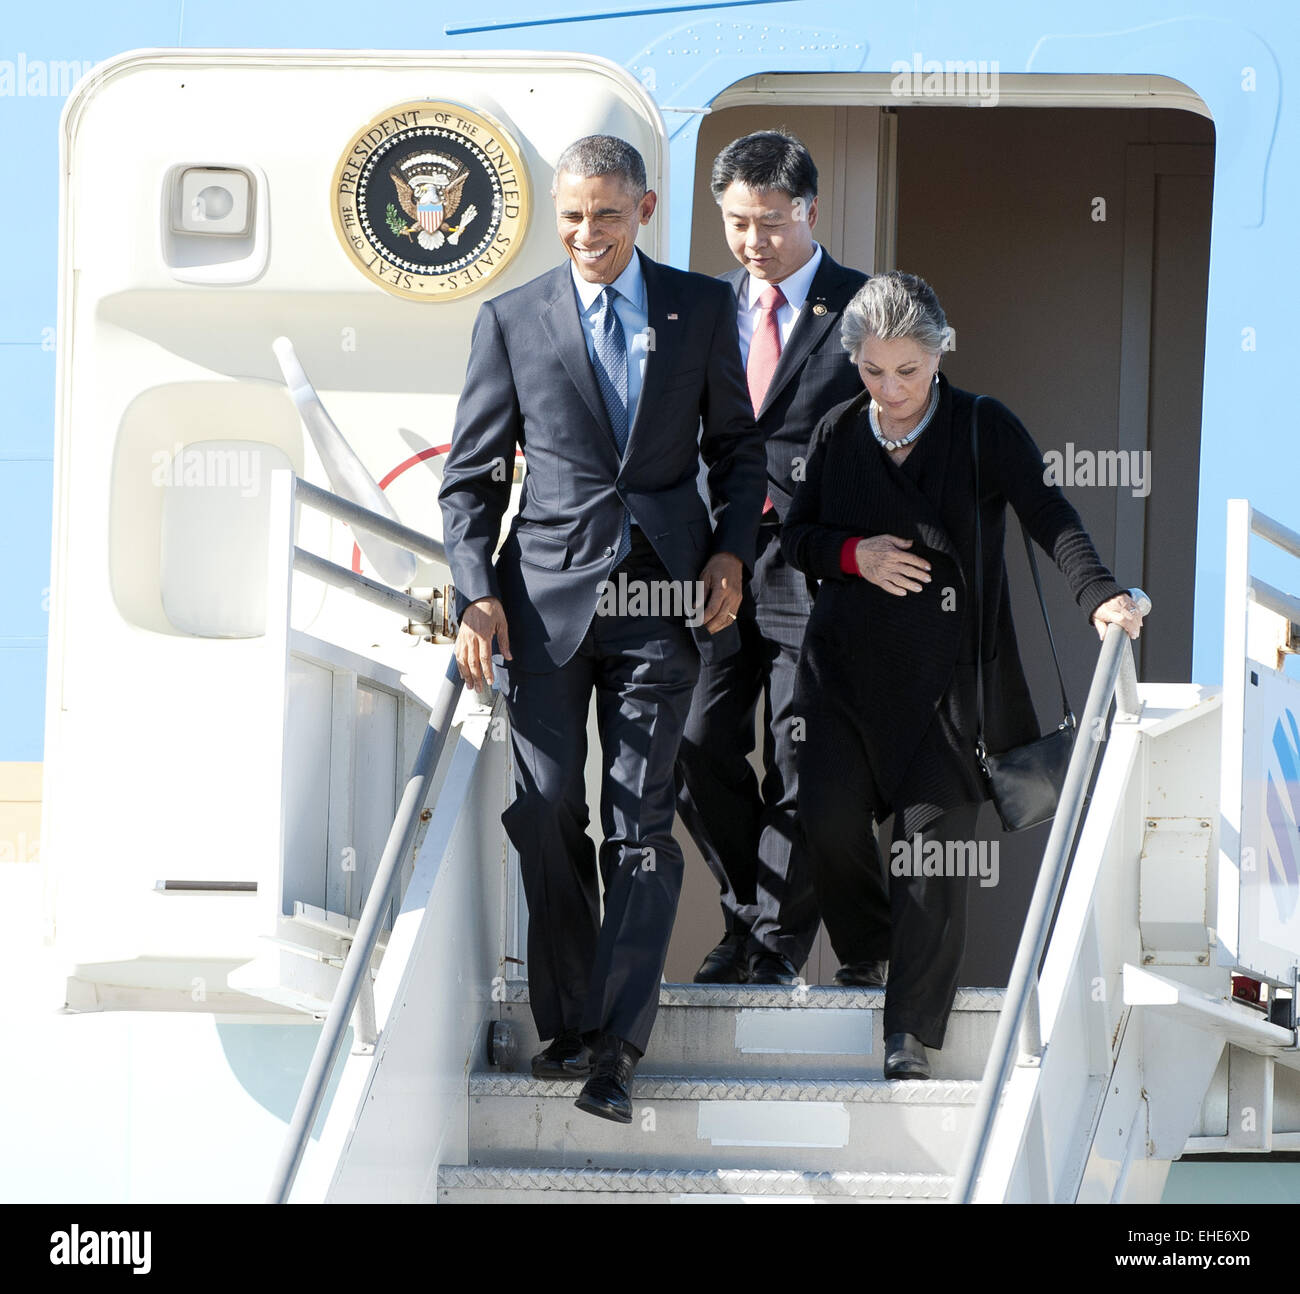 Los Angeles, California, USA. 12th Mar, 2015. President Barack Obama, accompanied by US Senator Barbara Boxer and US Congressman Ted Leiu, arrived aboard Air Force One just after 4 p.m. on Thursday afternoon. Obama descended the stairs and was greeted by Los Angeles Mayor Eric Garcetti with a handshake and a hug. After saying good bye to Boxer and Leiu, Garcetti walked with Obama to board Marine One en route to Burbank Airport where the president would continue on for a planned appearance on the Jimmy Kimmel Live! show in Hollywood. Credit:  David Bro/ZUMA Wire/Alamy Live News Stock Photo